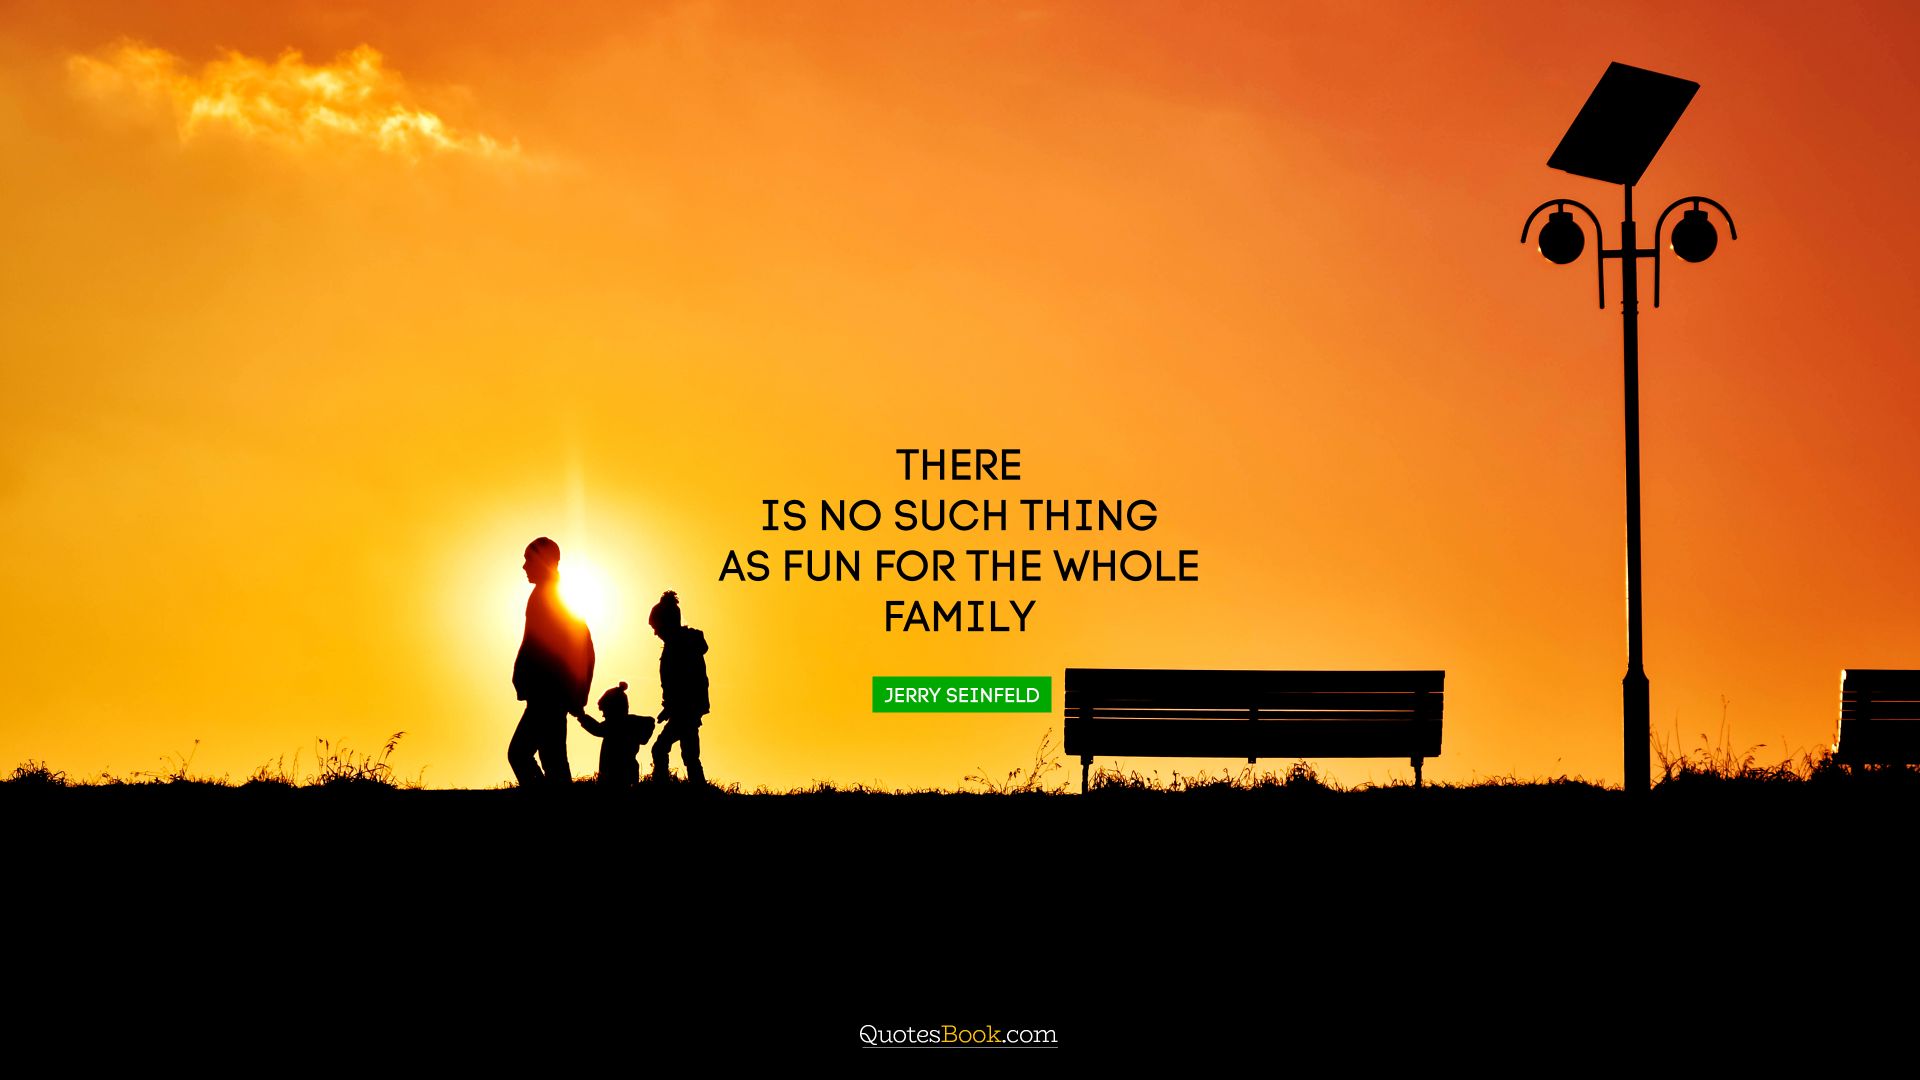 There is no such thing as fun for the whole family. - Quote by Jerry Seinfeld